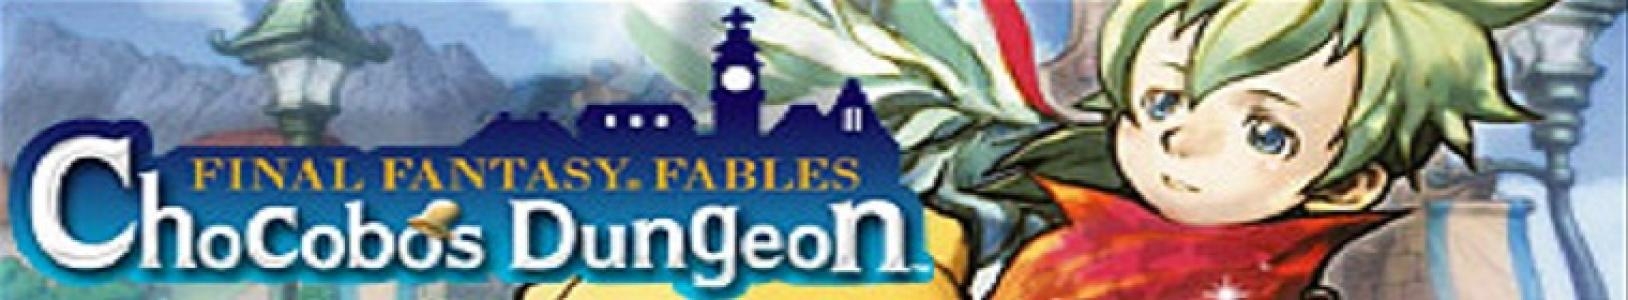 Final Fantasy Fables: Chocobo's Dungeon banner